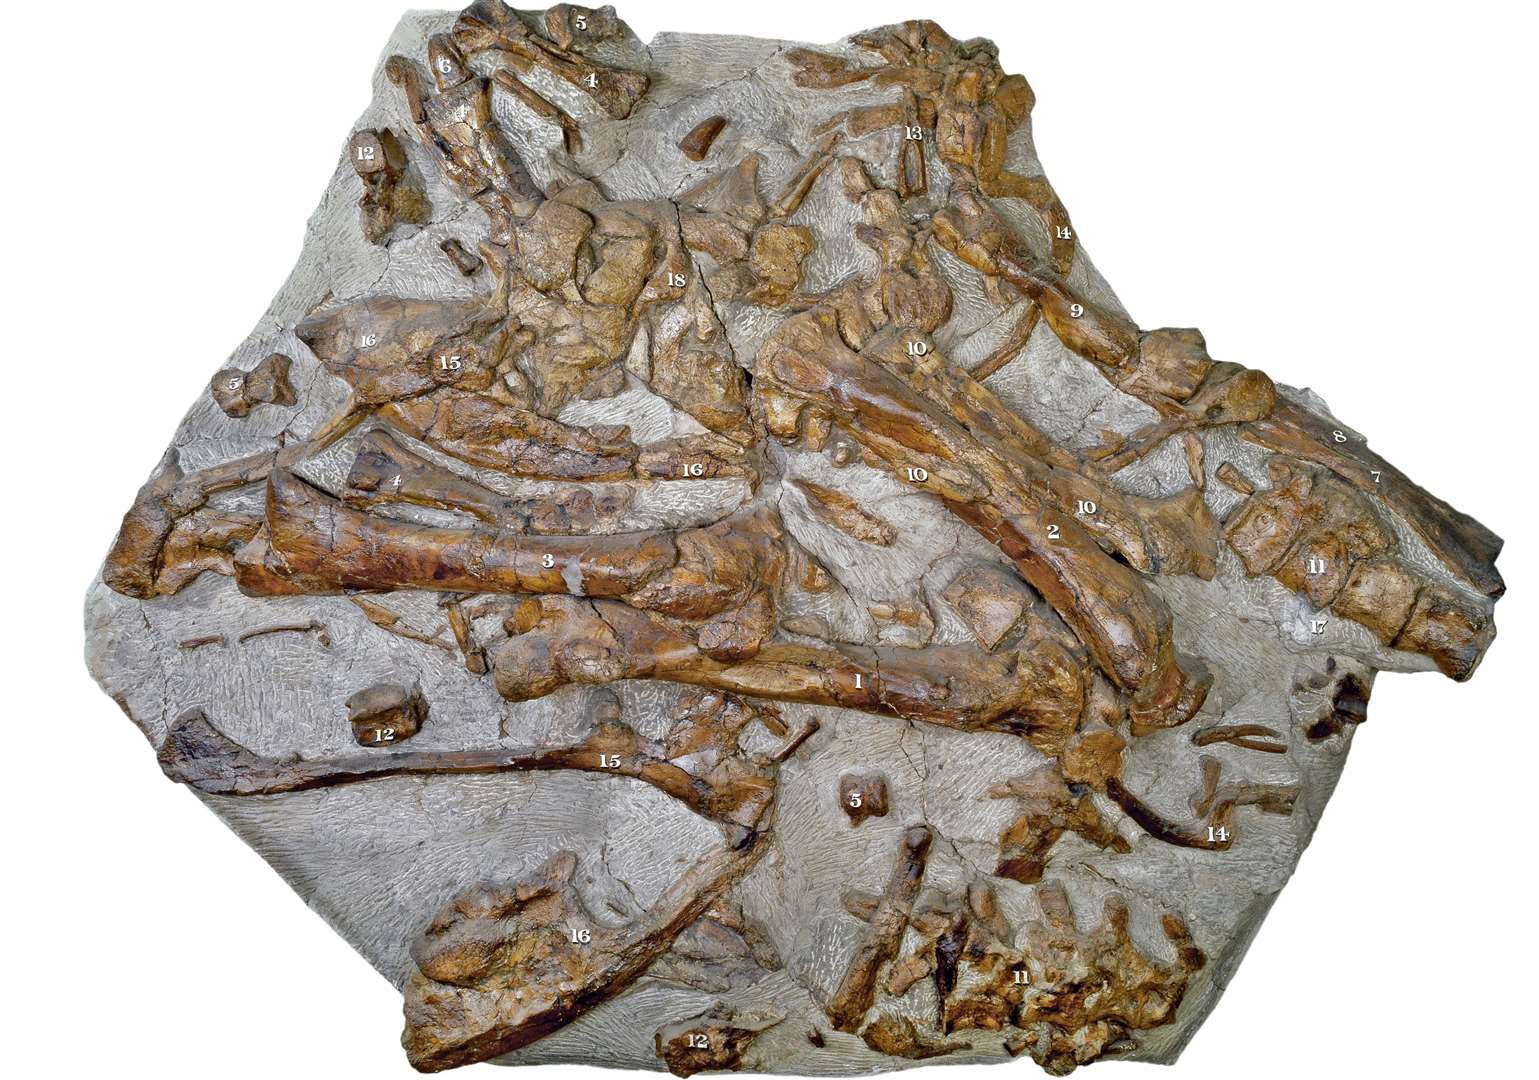 The ‘Maidstone slab’ features a jumble of iguanodon bones – first unearthed in 1824. Picture: National History Museum